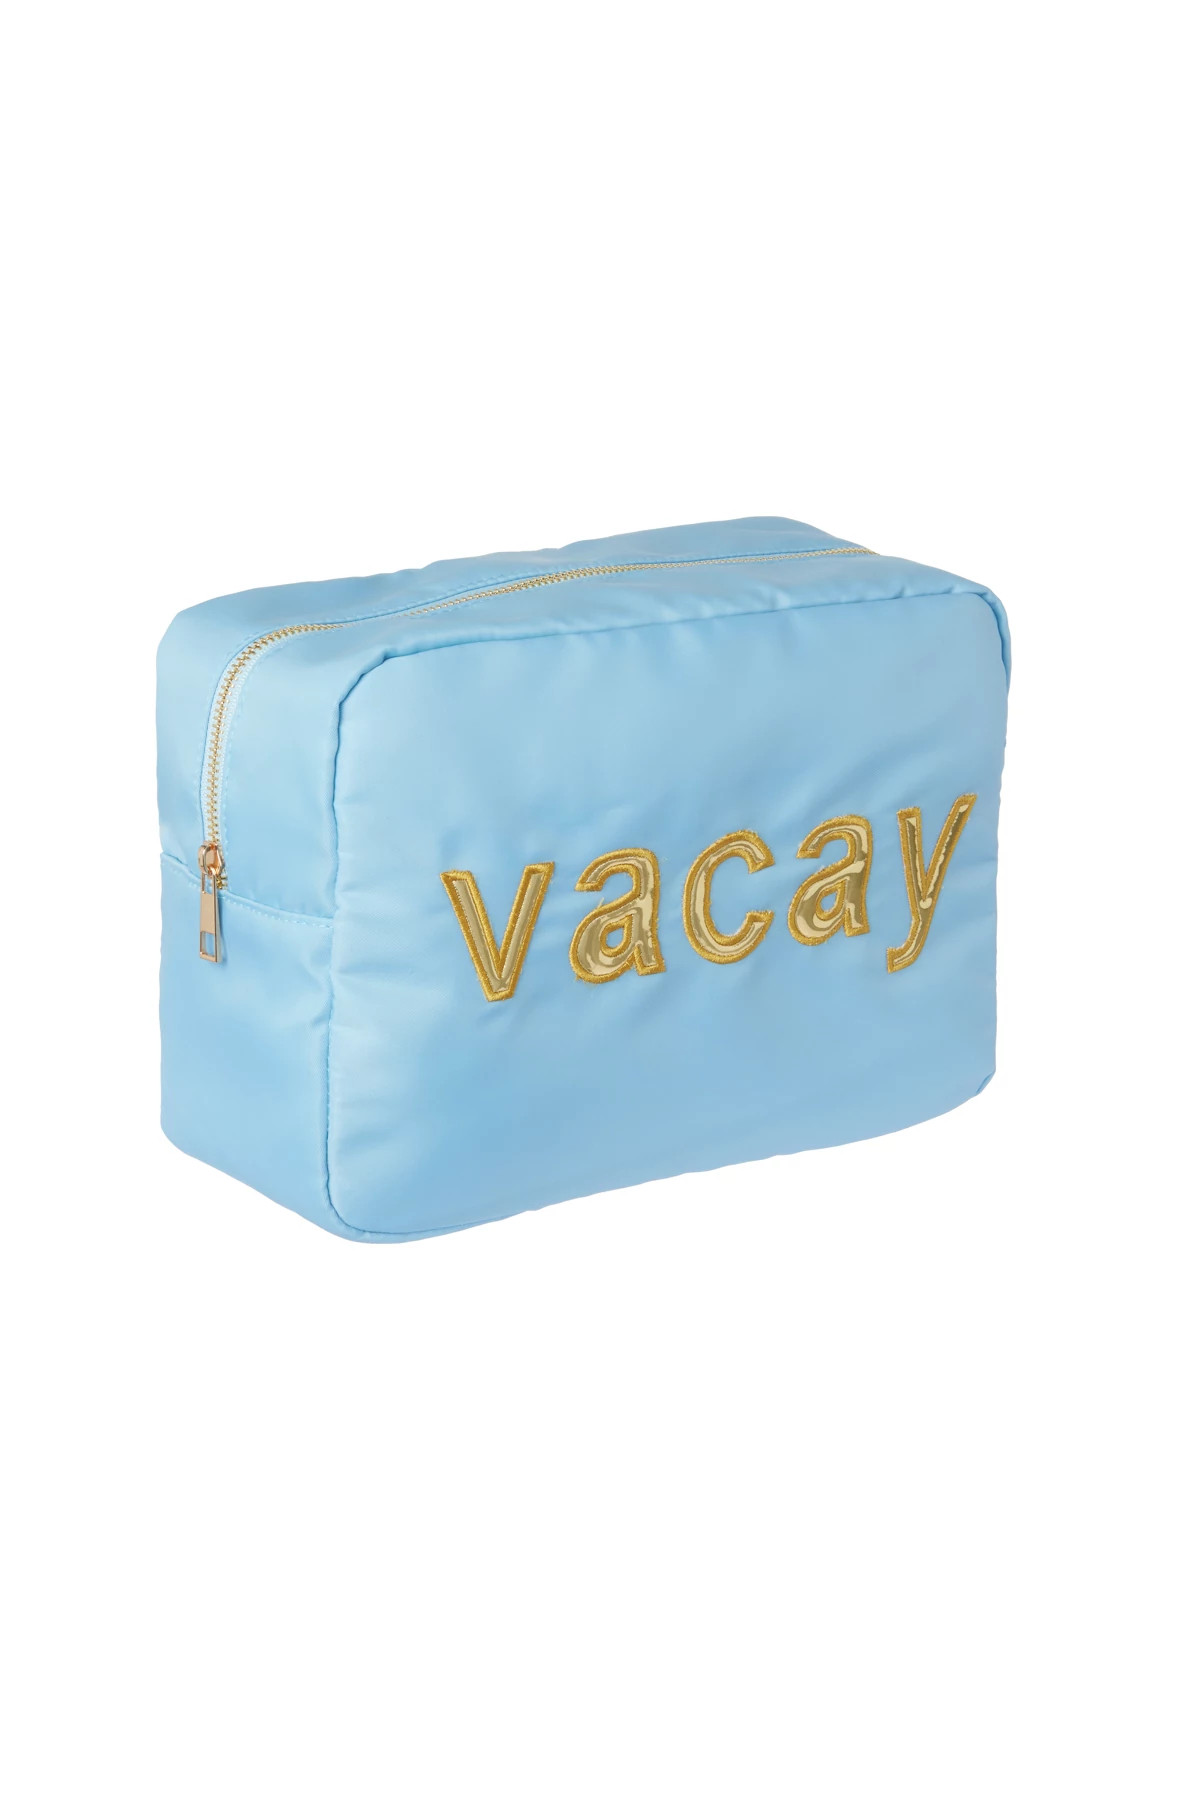 BLUE Vacay Zip Pouch image number 1